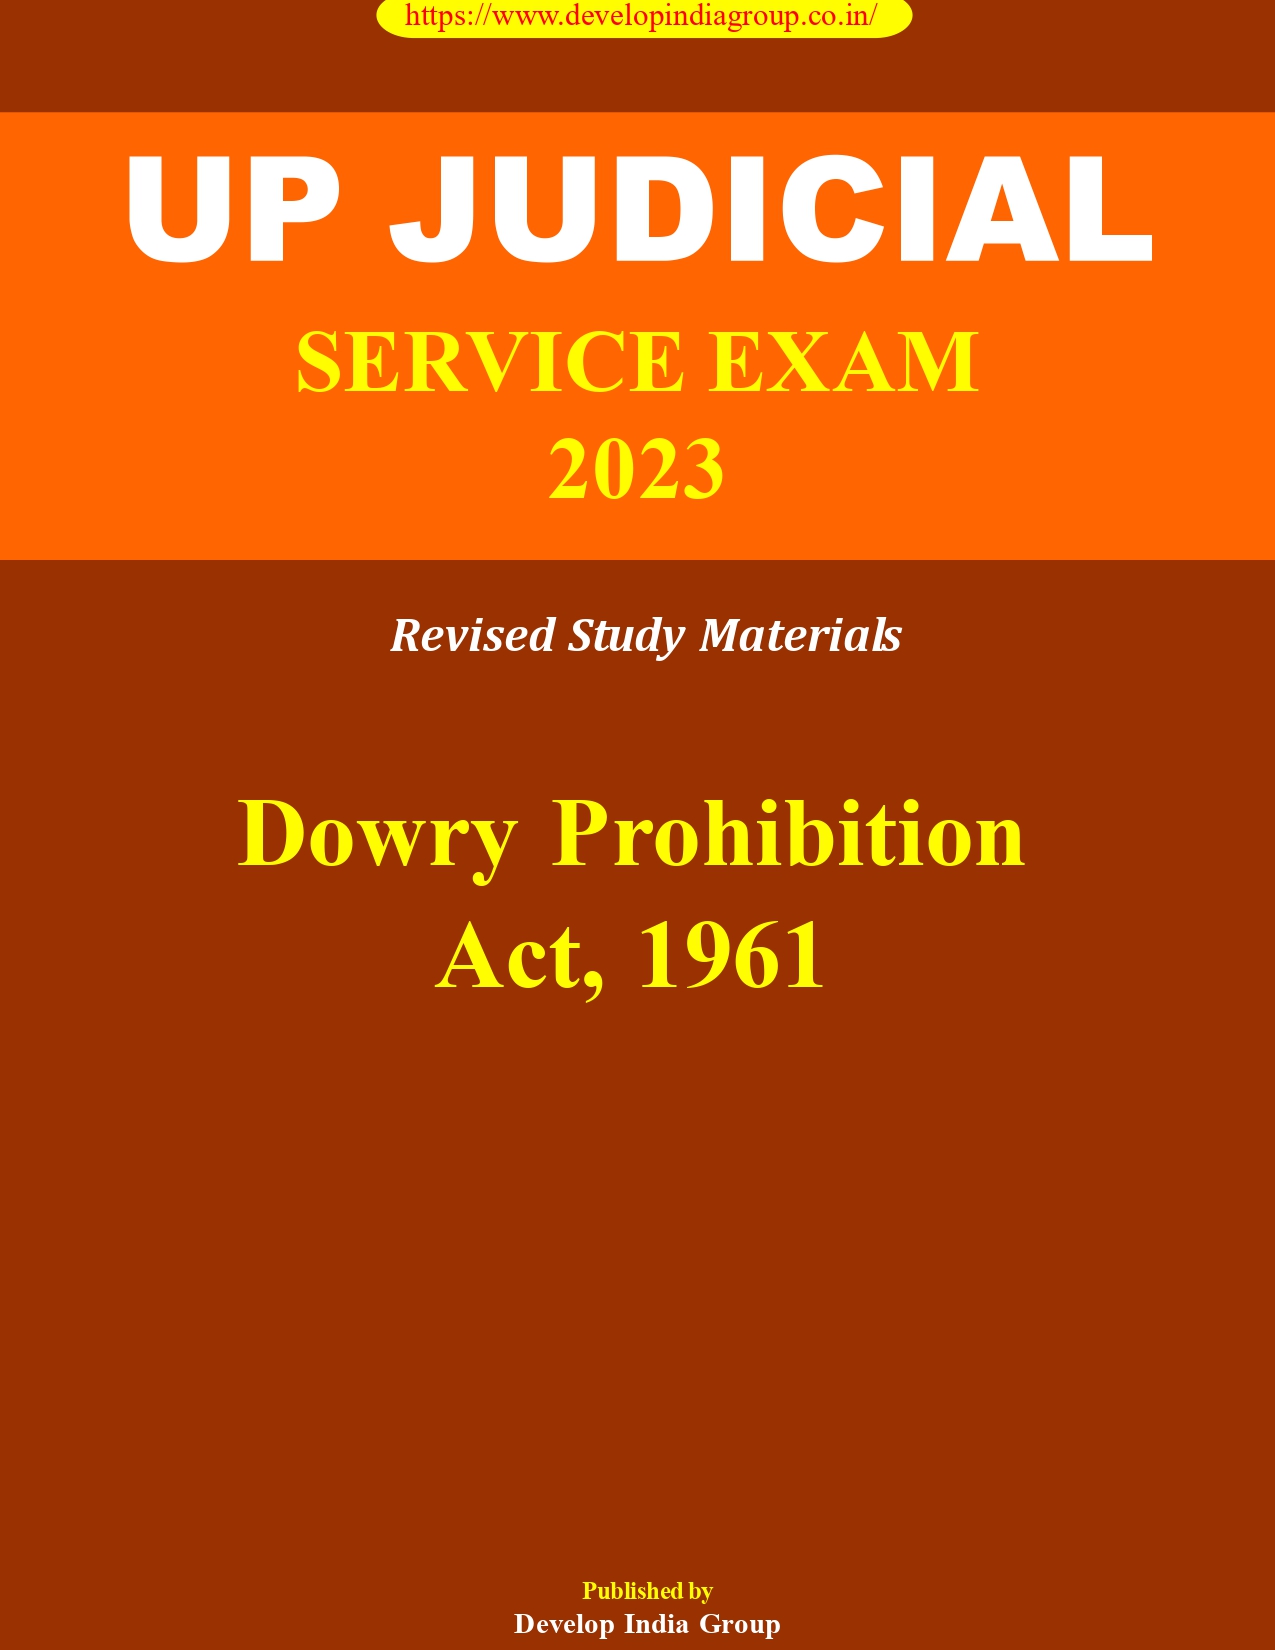 Dowry Prohibition Act, 1961 sample_page-0001